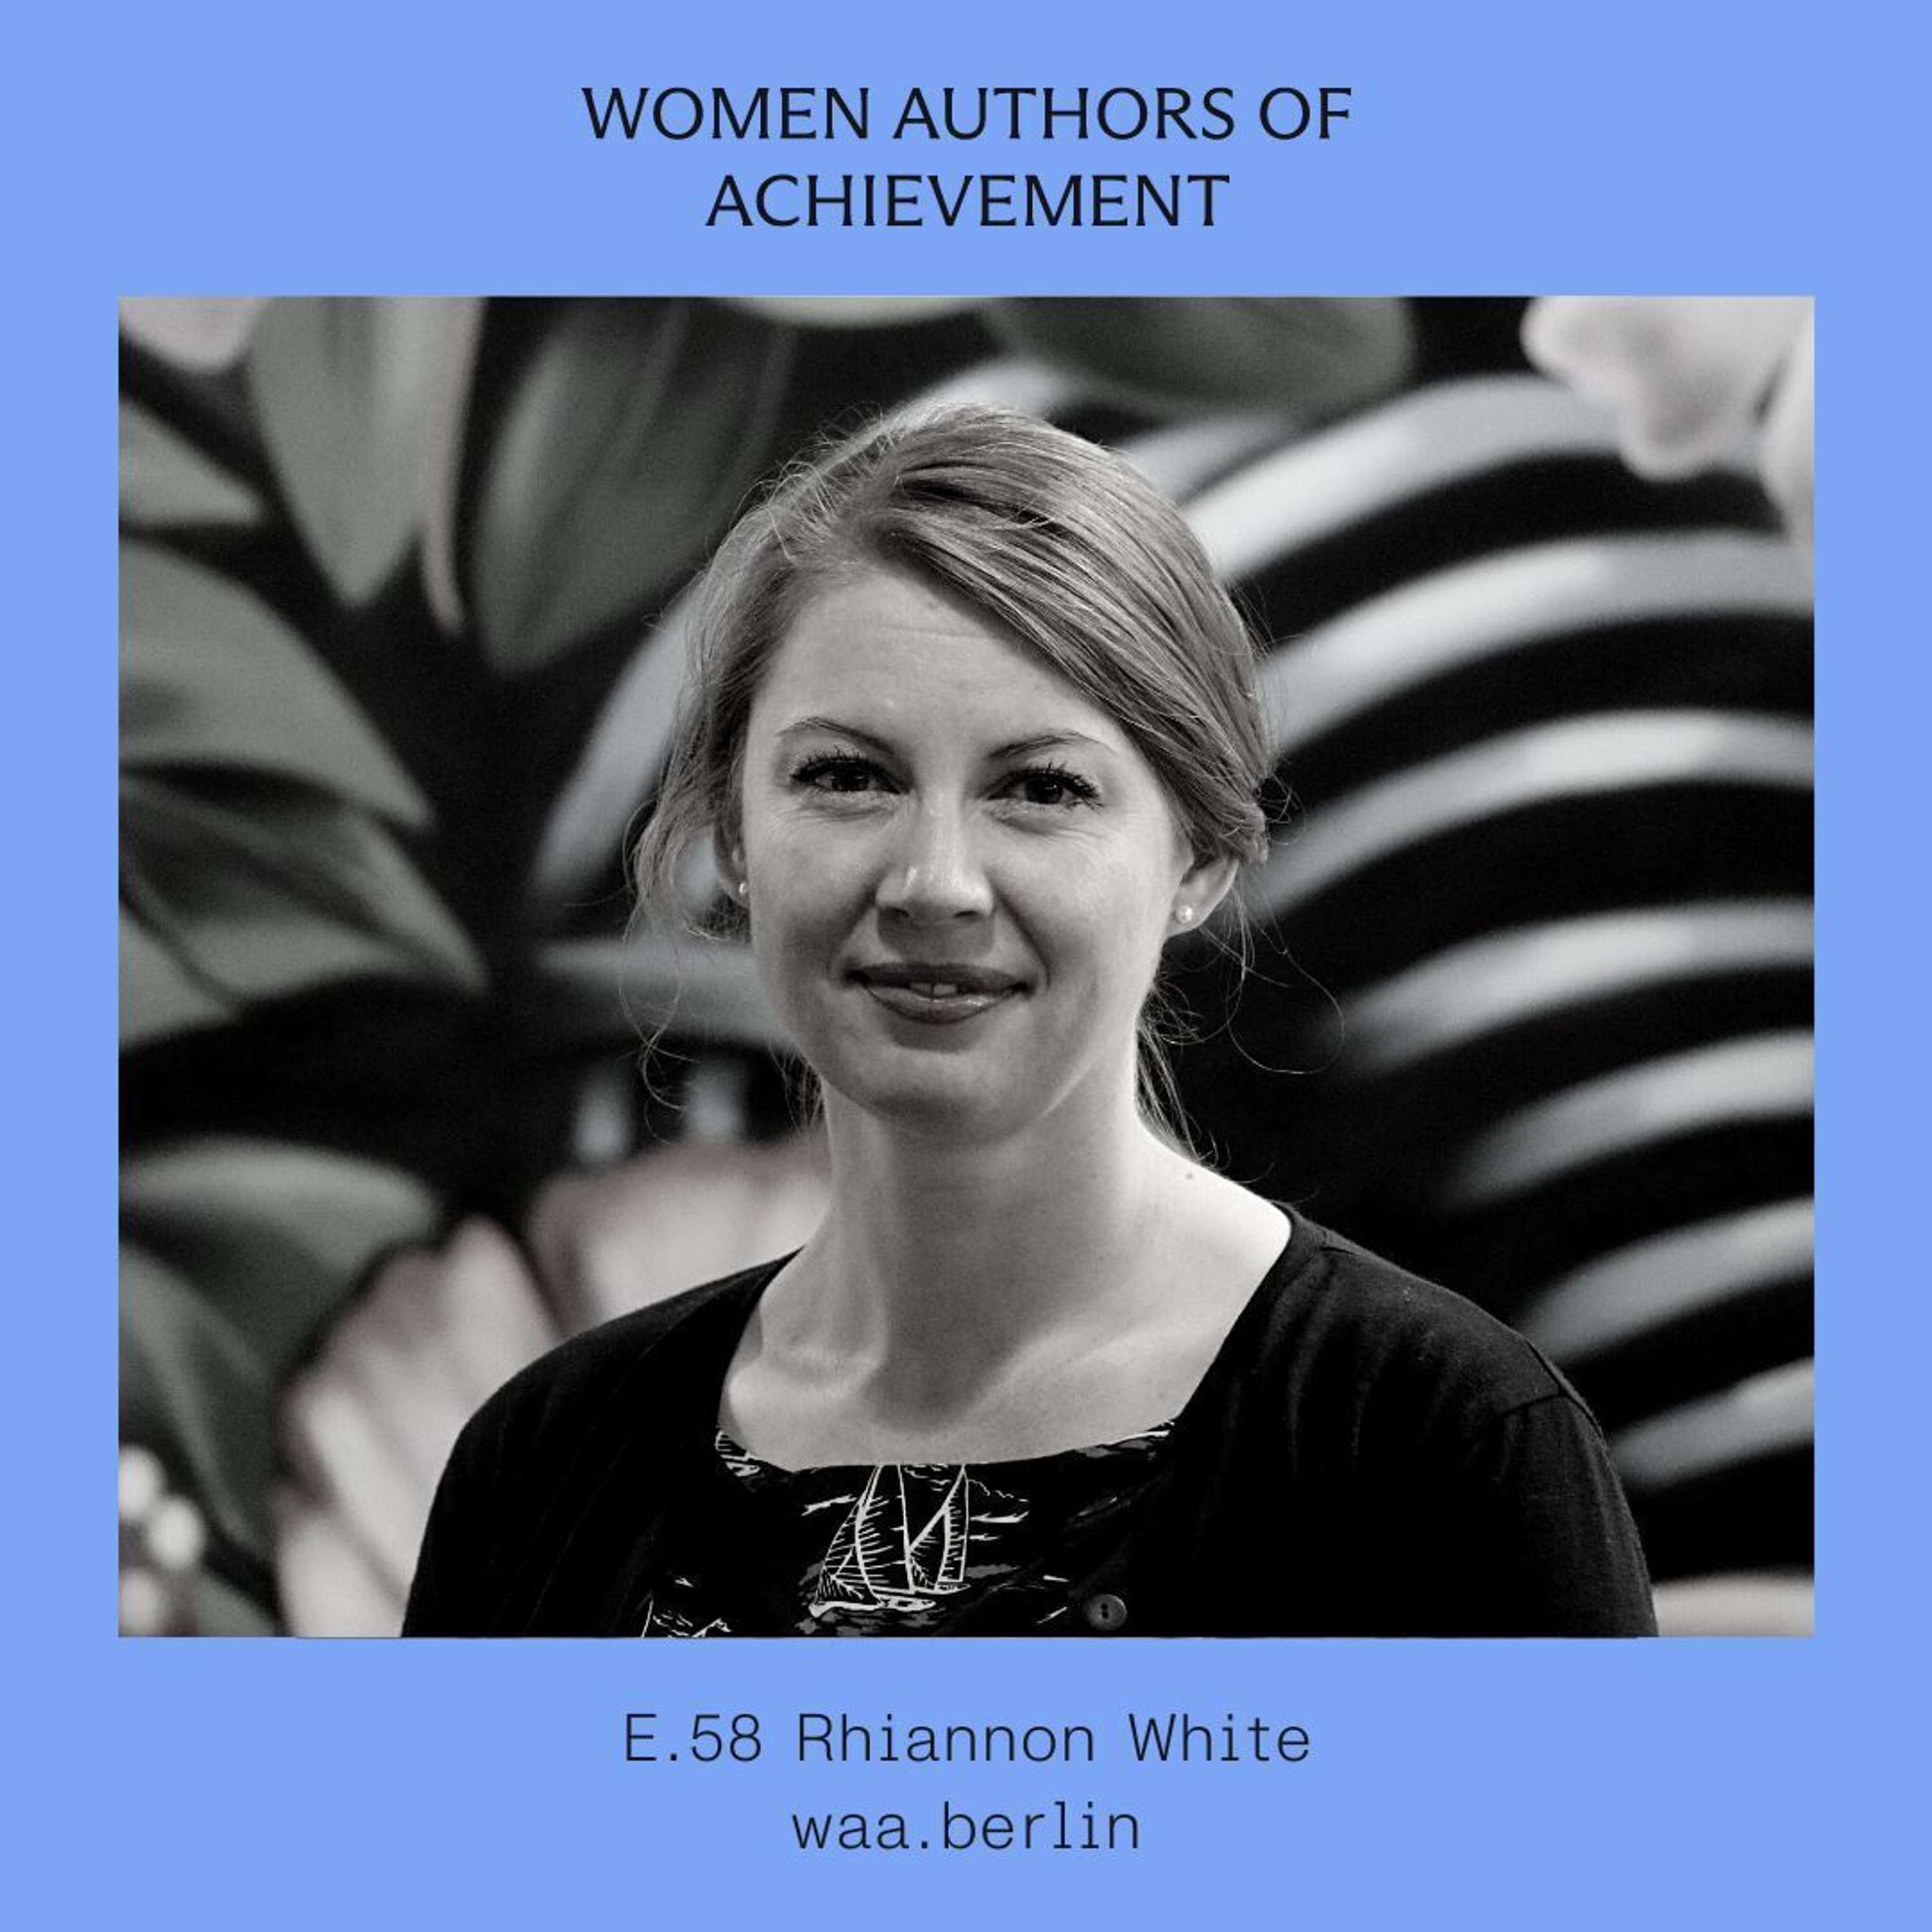 E.58 Empowering women through FemTech and giving them agency over their own health with Rhiannon White